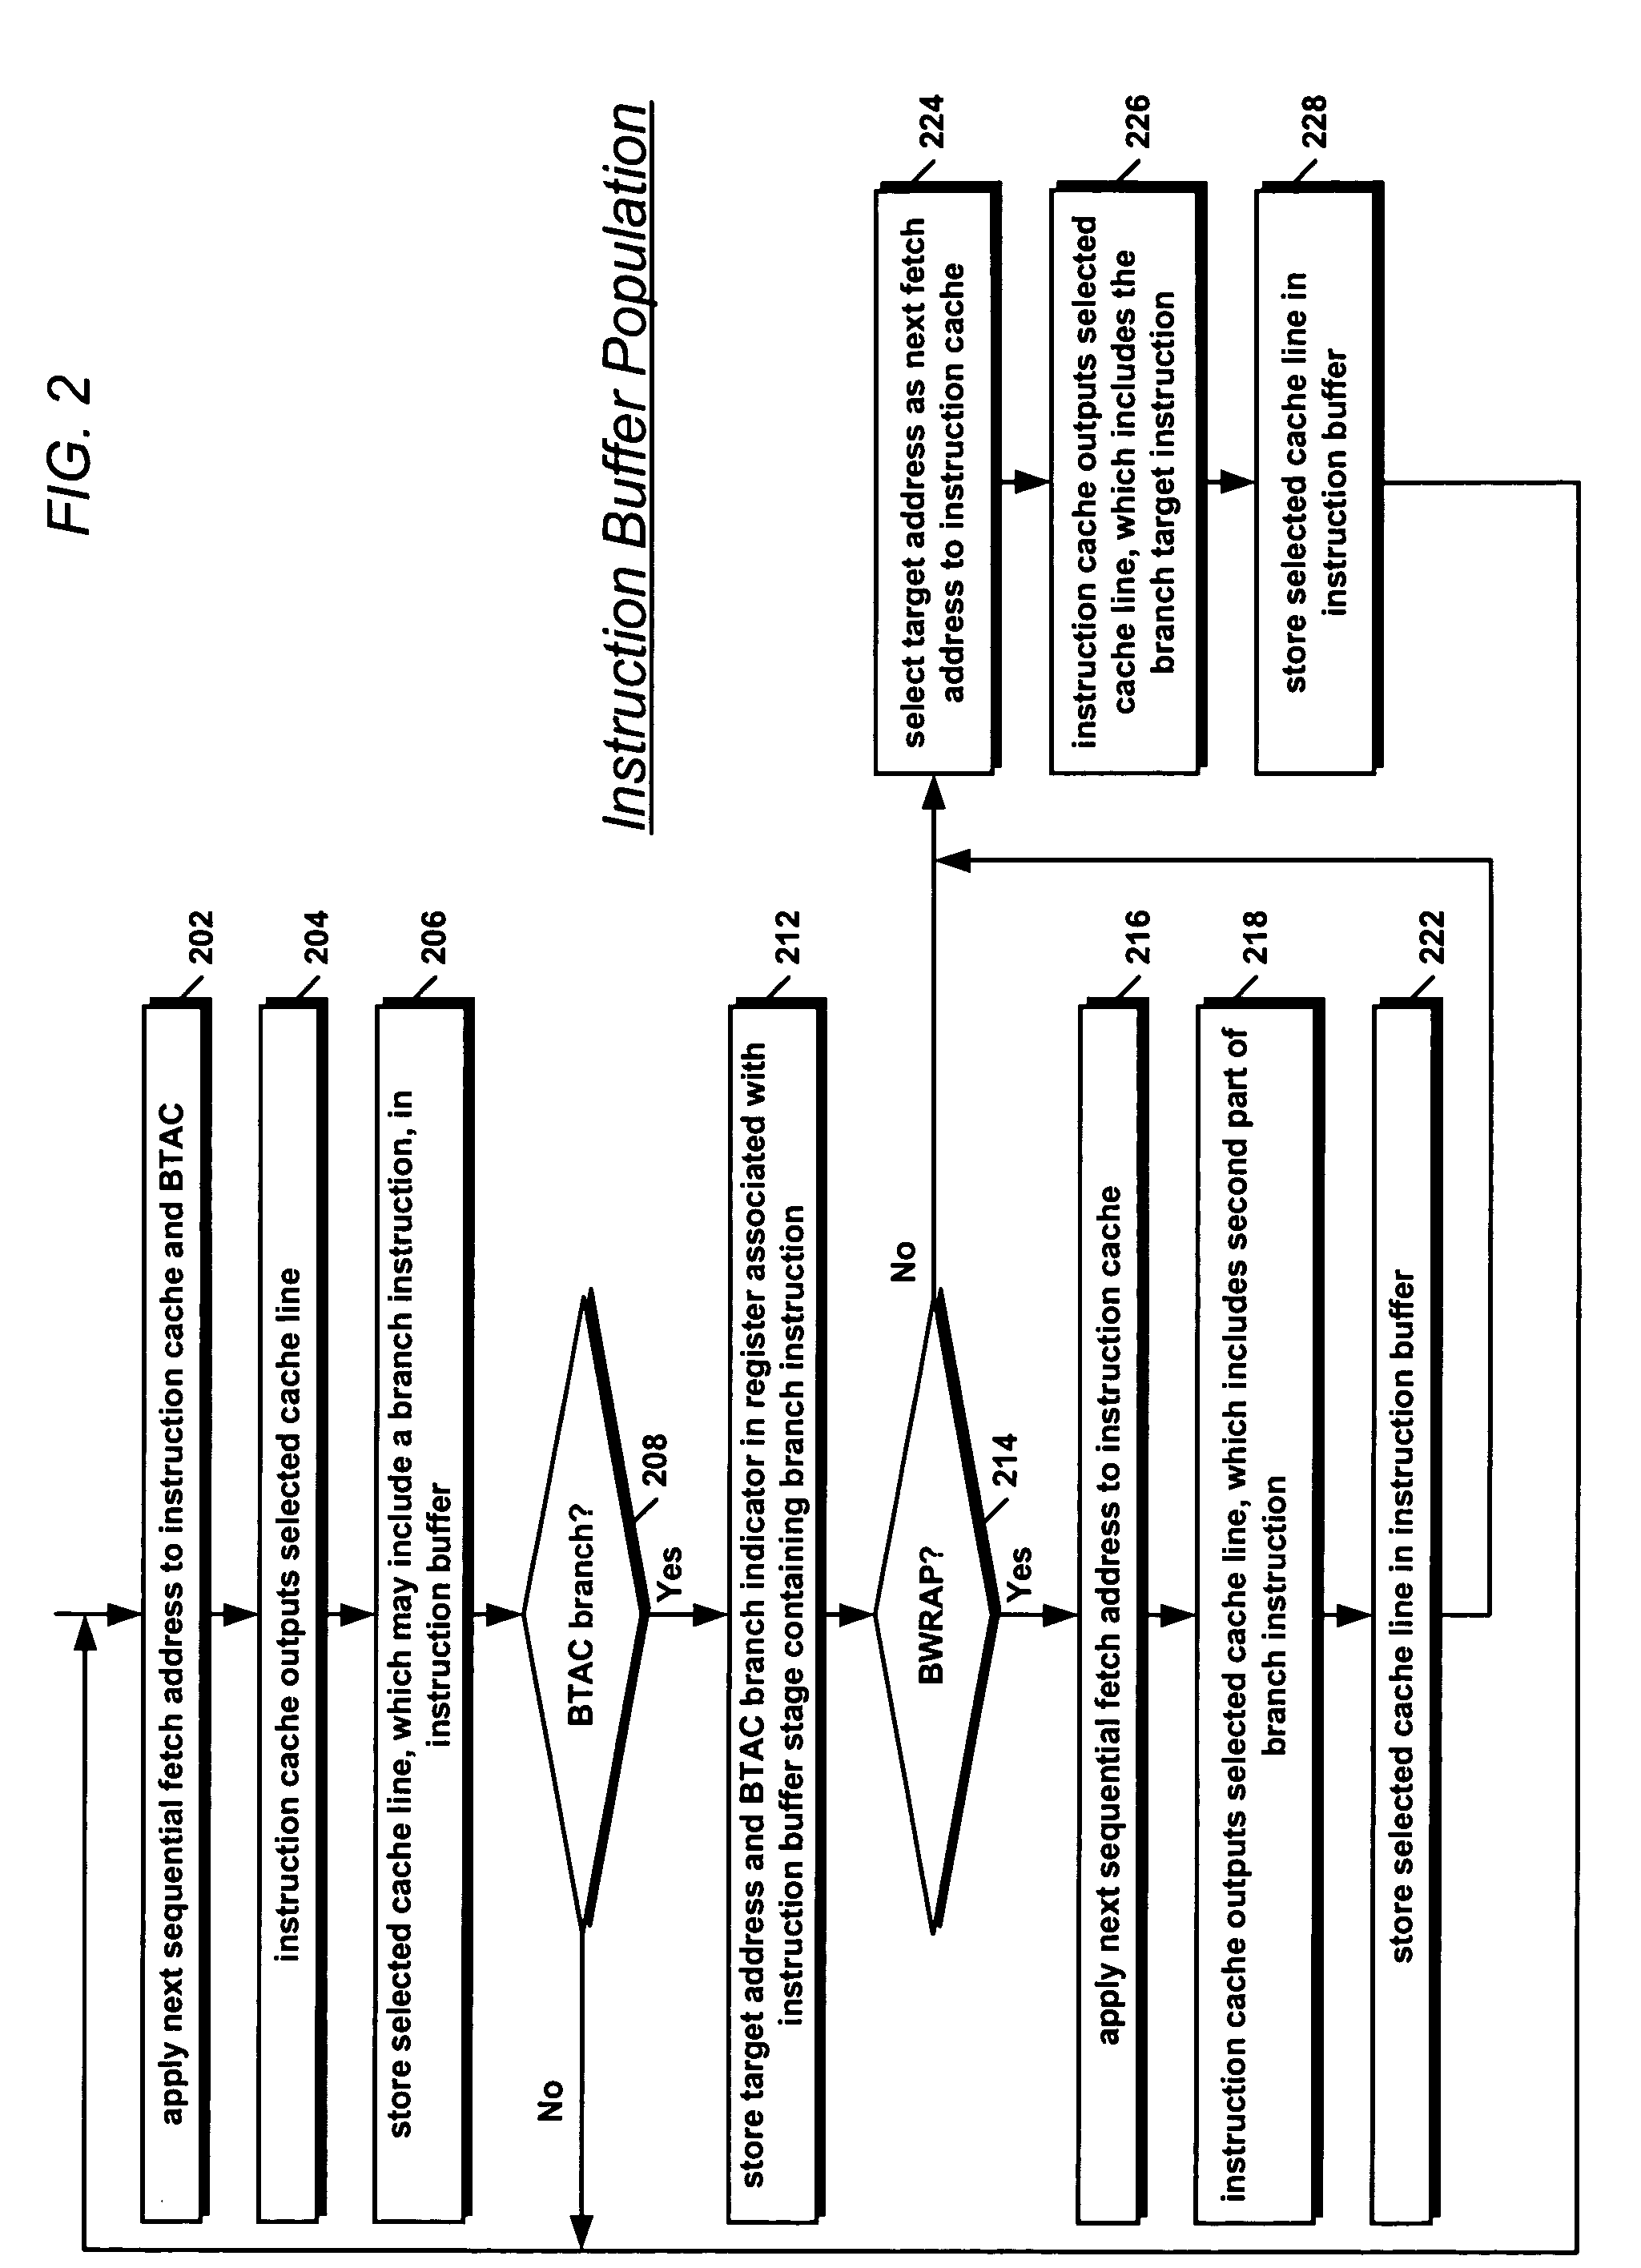 Apparatus and method for selectively accessing disparate instruction buffer stages based on branch target address cache hit and instruction stage wrap